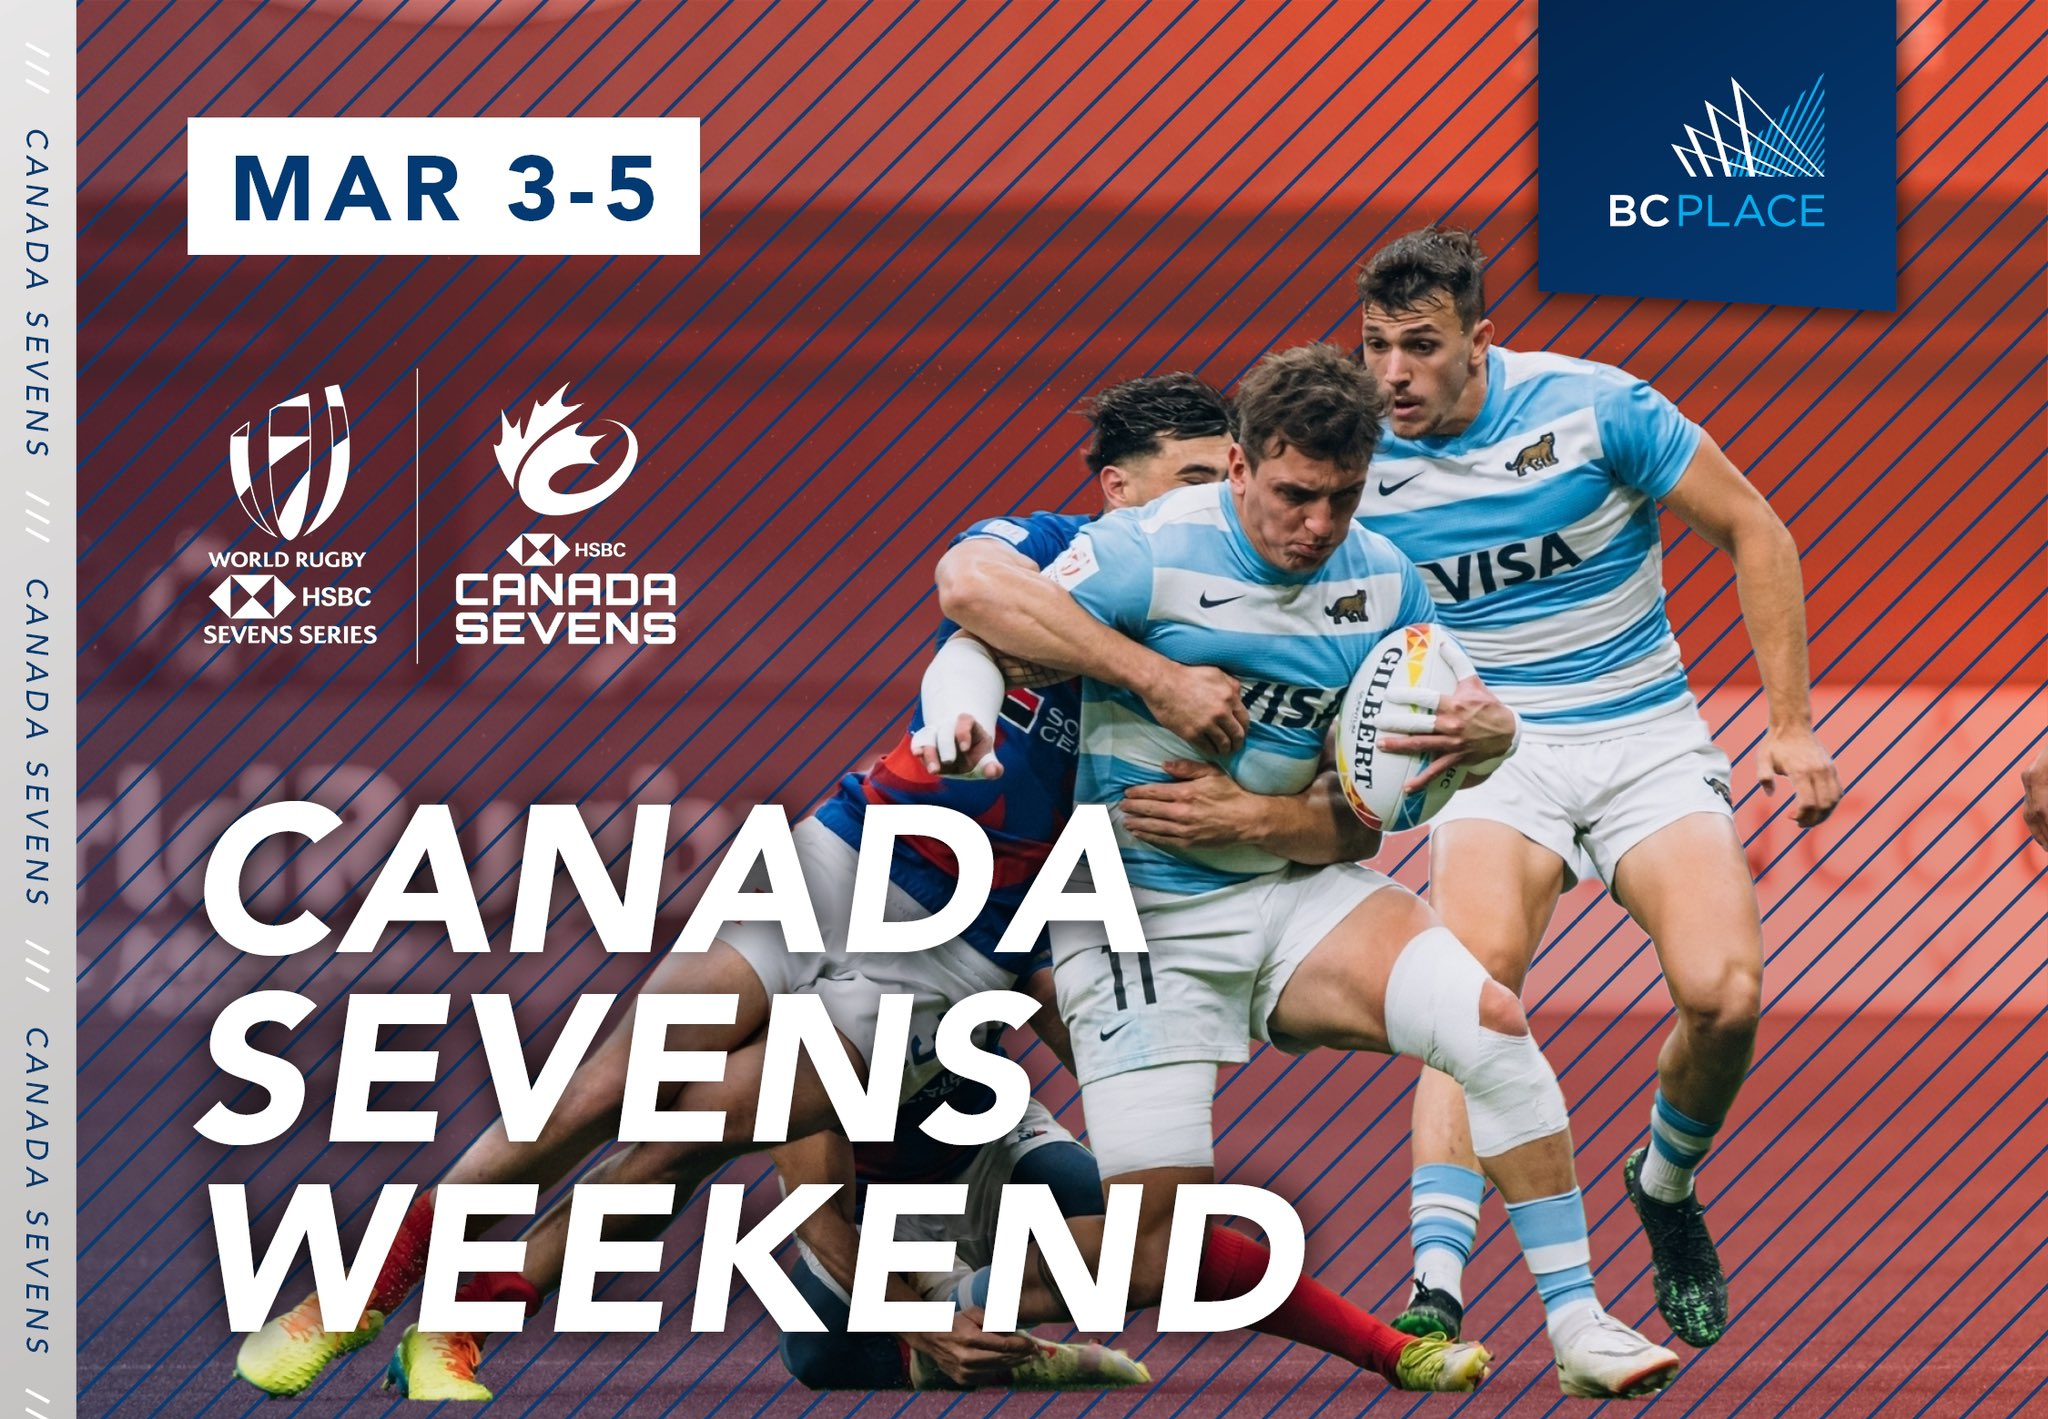 7s rugby live stream